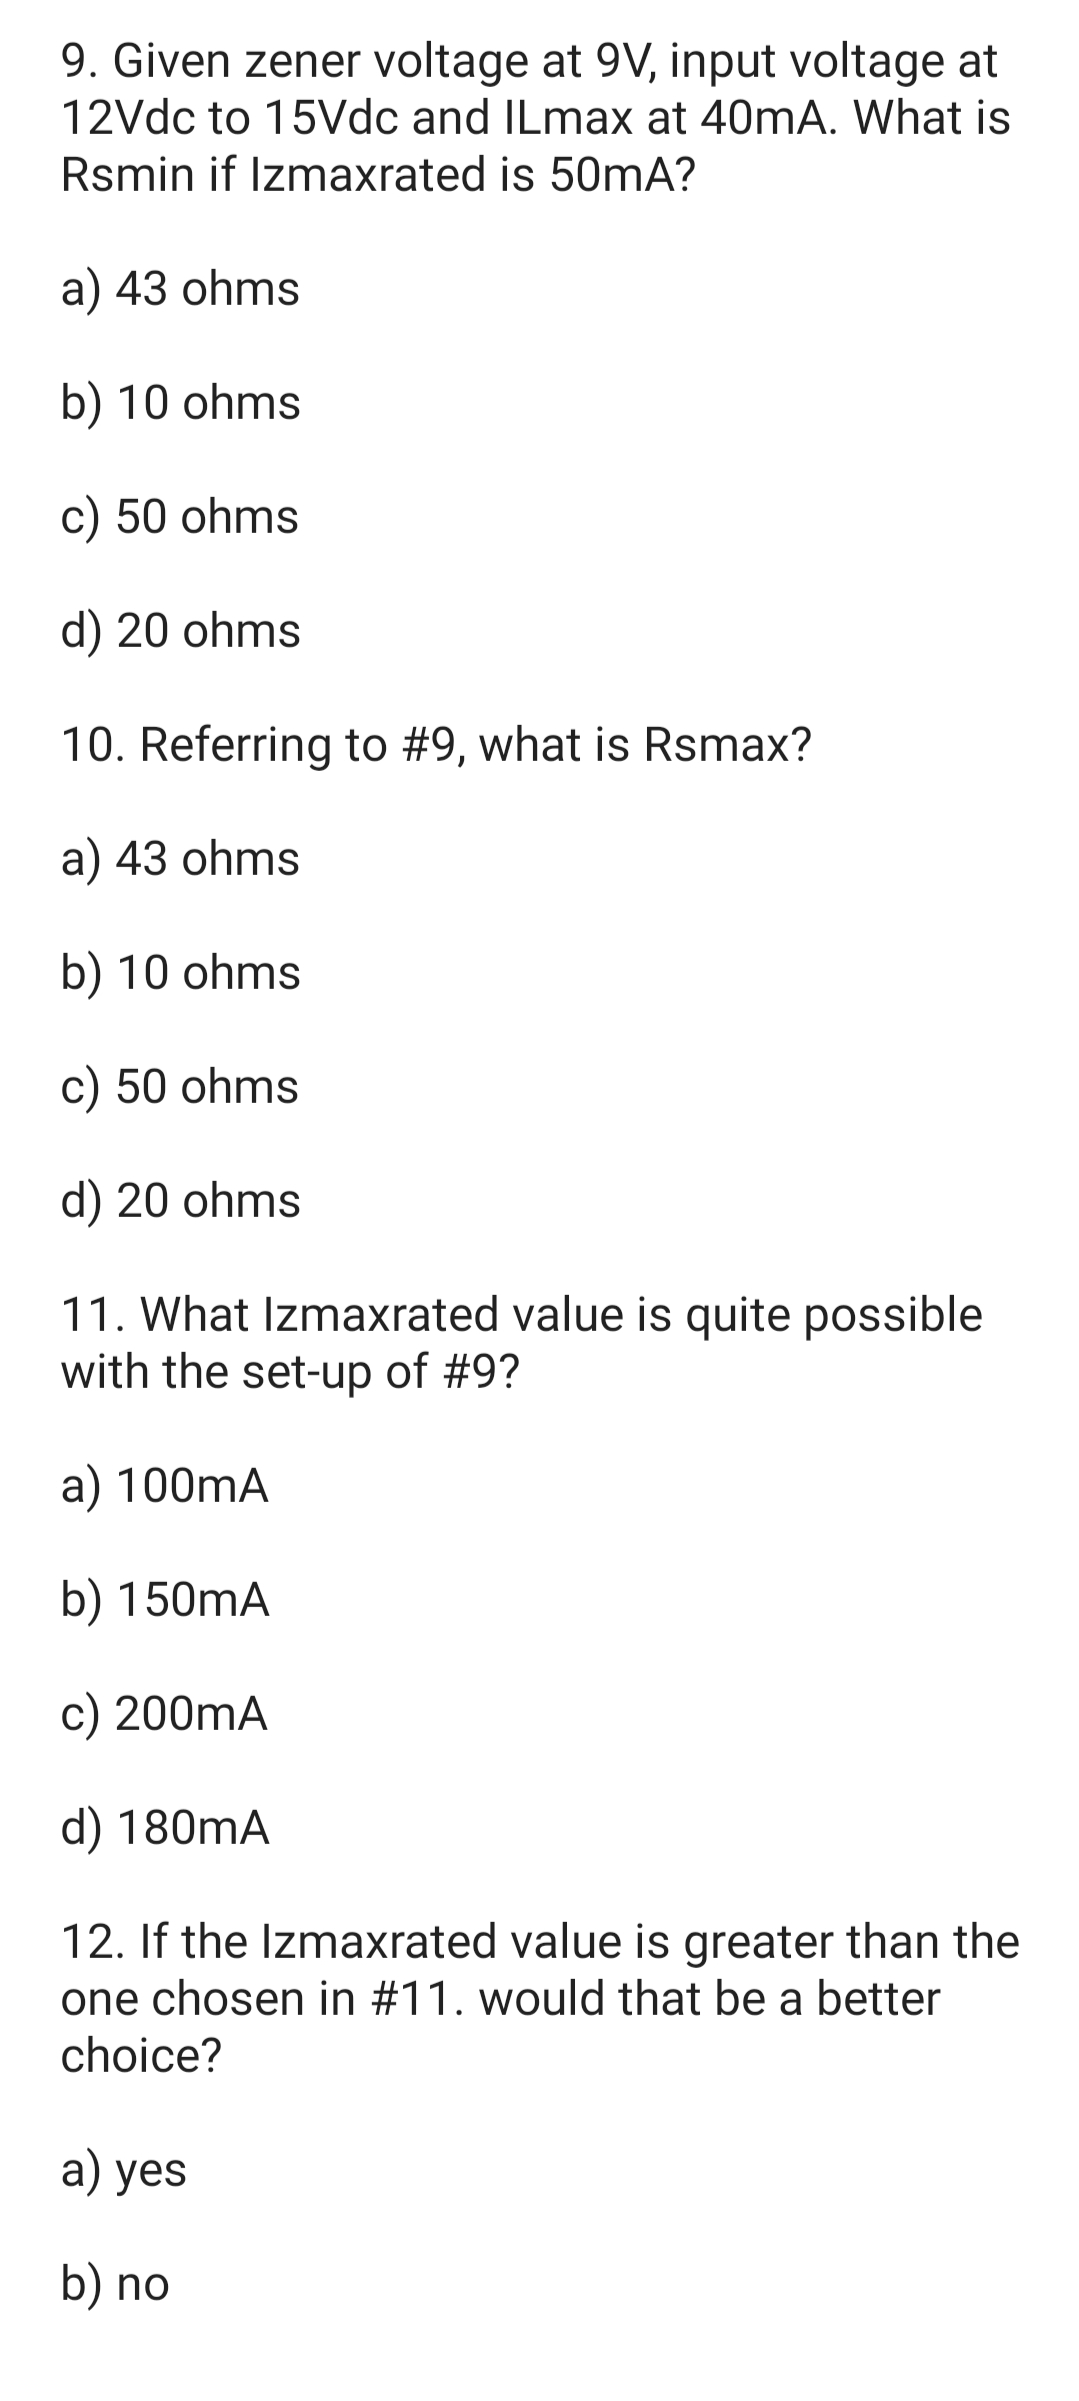 9. Given zener voltage at 9V, input voltage at
12Vdc to 15Vdc and ILmax at 40mA. What is
Rsmin if Izmaxrated is 50mA?
a) 43 ohms
b) 10 ohms
c) 50 ohms
d) 20 ohms
10. Referring to #9, what is Rsmax?
a) 43 ohms
b) 10 ohms
c) 50 ohms
d) 20 ohms
11. What Izmaxrated value is quite possible
with the set-up of #9?
a) 100mA
b) 150mA
c) 200mA
d) 180mA
12. If the Izmaxrated value is greater than the
one chosen in #11. would that be a better
choice?
a) yes
b) no
